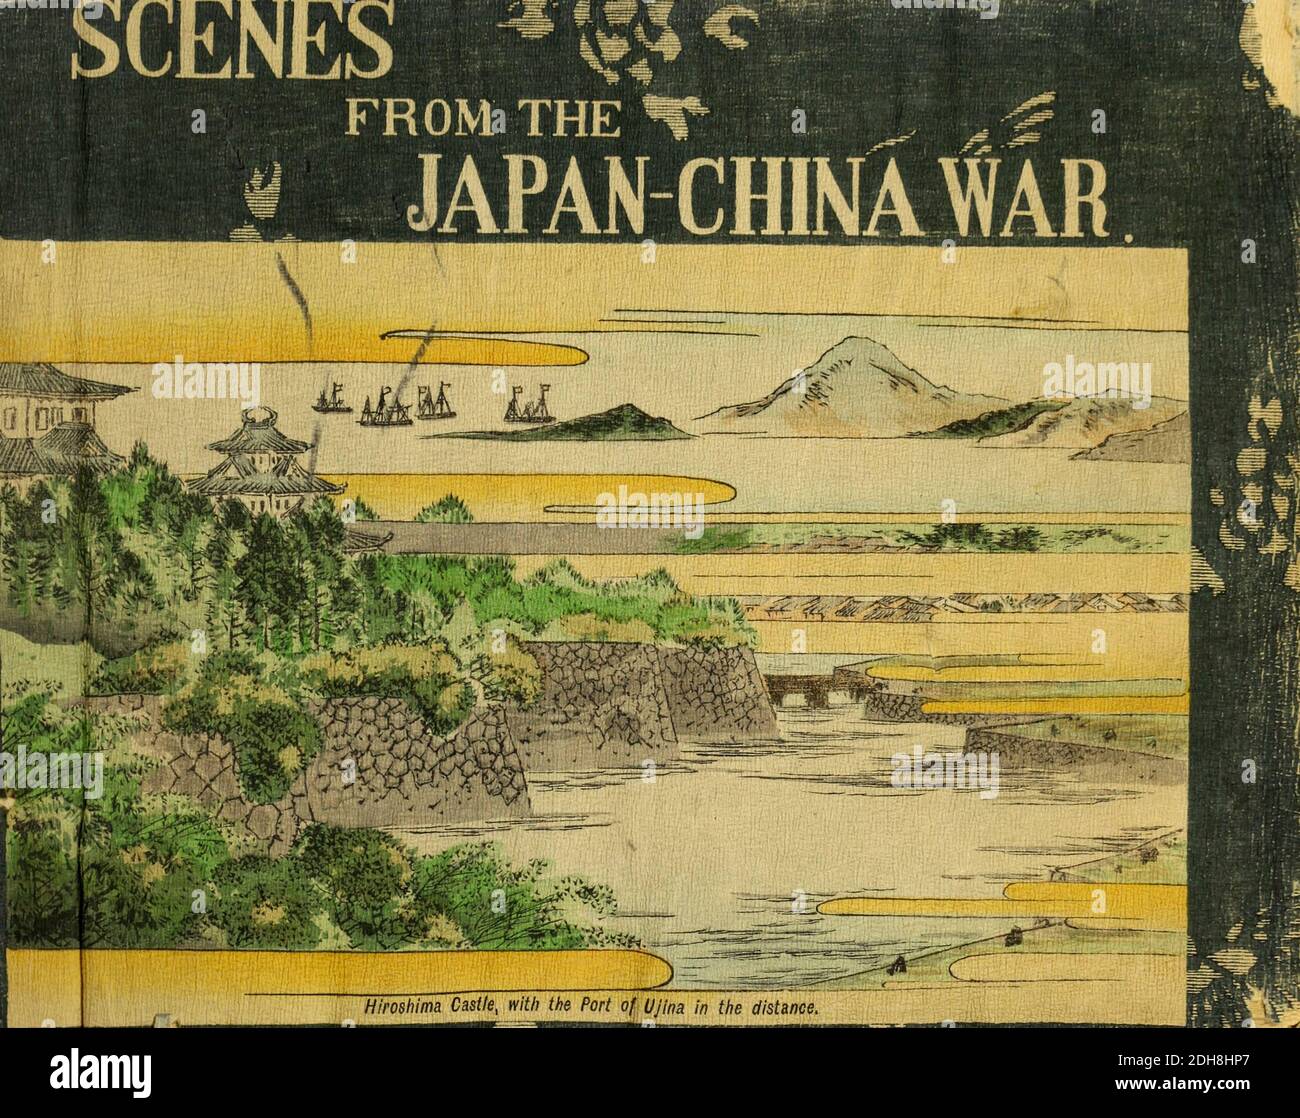 Book cover From the book 'Scenes from the Japan-China War' by Inouye, Jukichi, 1862-1929; Yamamoto, Eiki, illustrator. Published in Tokyo in 1895 with English Text. The First Sino-Japanese War (25 July 1894 – 17 April 1895) was a conflict between the Qing dynasty of China and the Empire of Japan primarily over influence in Joseon Korea. After more than six months of unbroken successes by Japanese land and naval forces and the loss of the port of Weihaiwei, the Qing government sued for peace in February 1895. Stock Photo